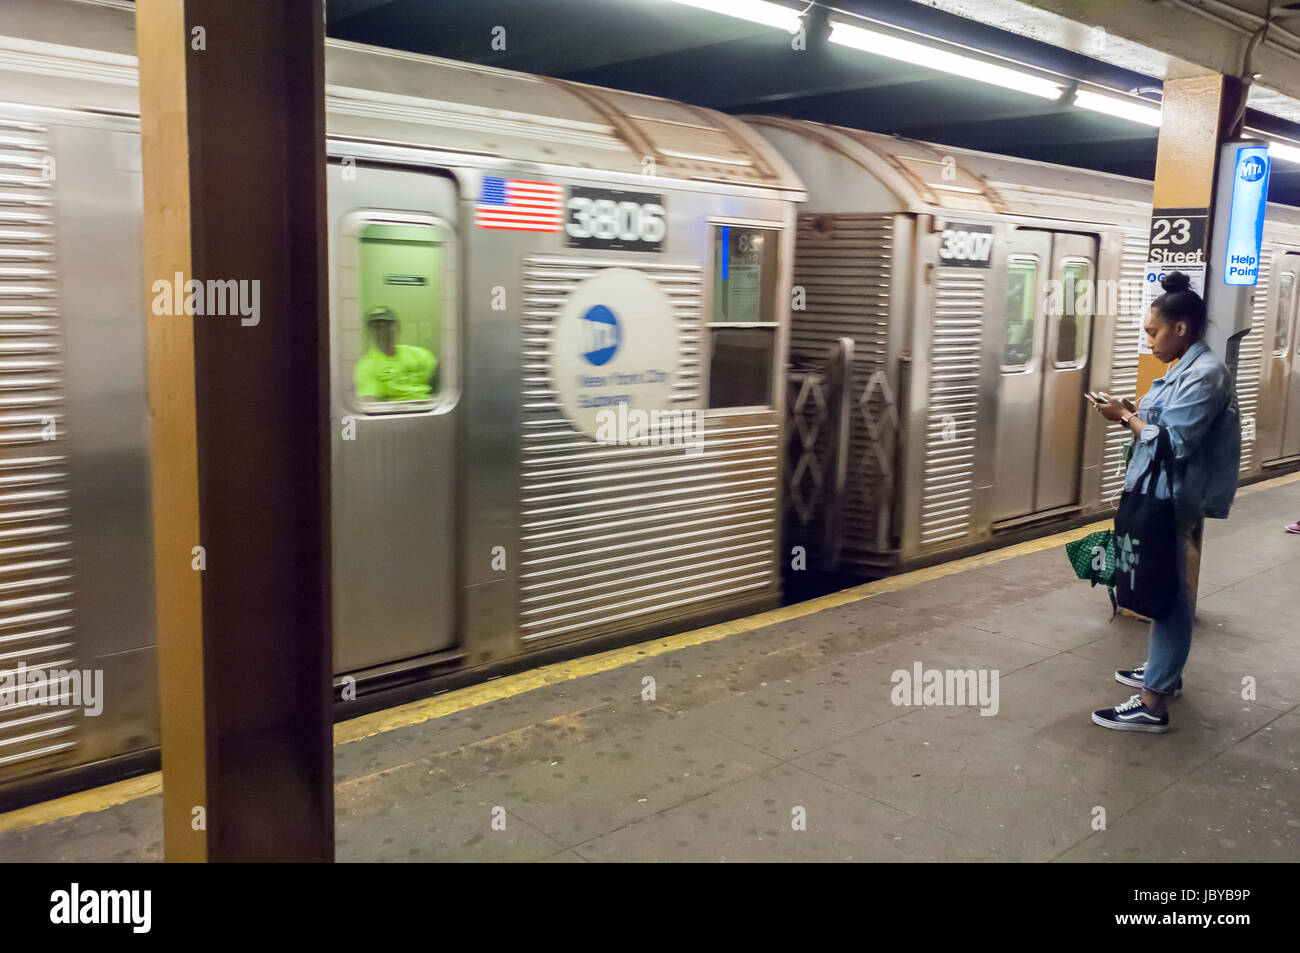 A 'C' train on the IND line arrives at the 23rd Street station in the subway in New York on Tuesday, June 6, 2017. The 'C' line R32 cars, known as 'Brightliners' , introduced over 50 years ago, are the oldest subway cars in the system breaking down more causing disruptions in commuter travel. Replacement cars are behind schedule and over budget due to production problems. (© Richard B. Levine) Stock Photo